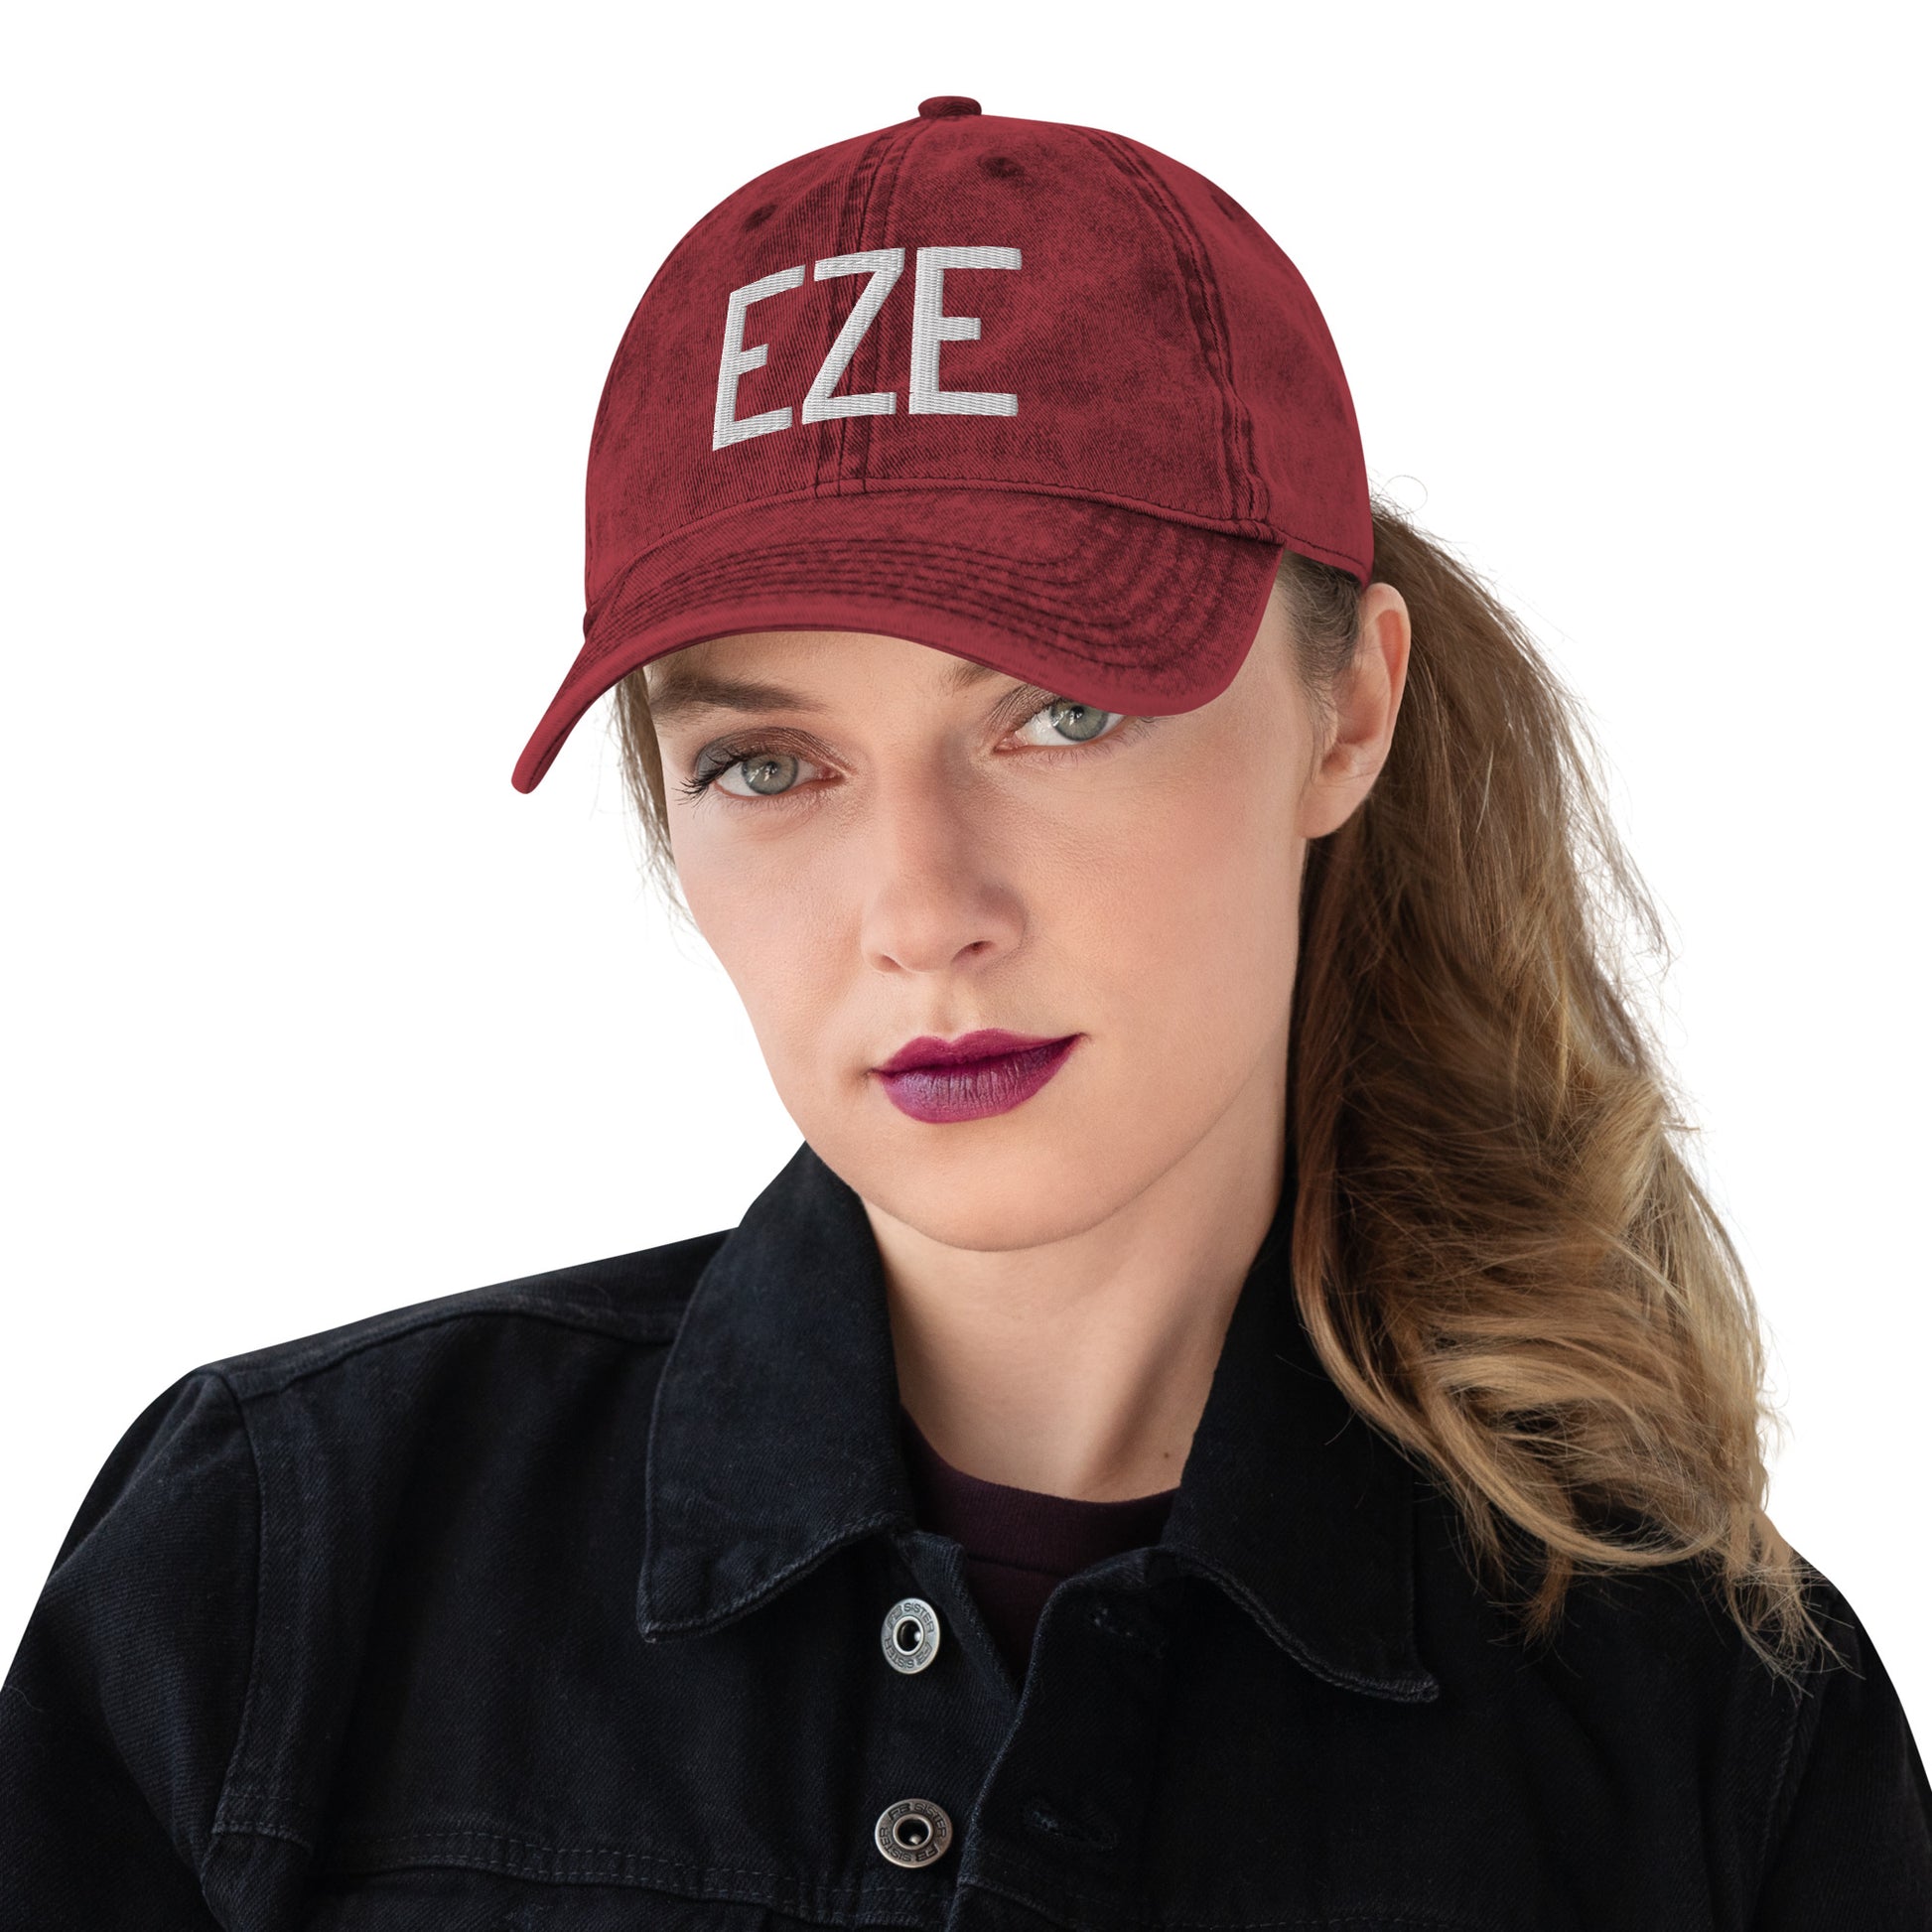 Airport Code Twill Cap - White • EZE Buenos Aires • YHM Designs - Image 05